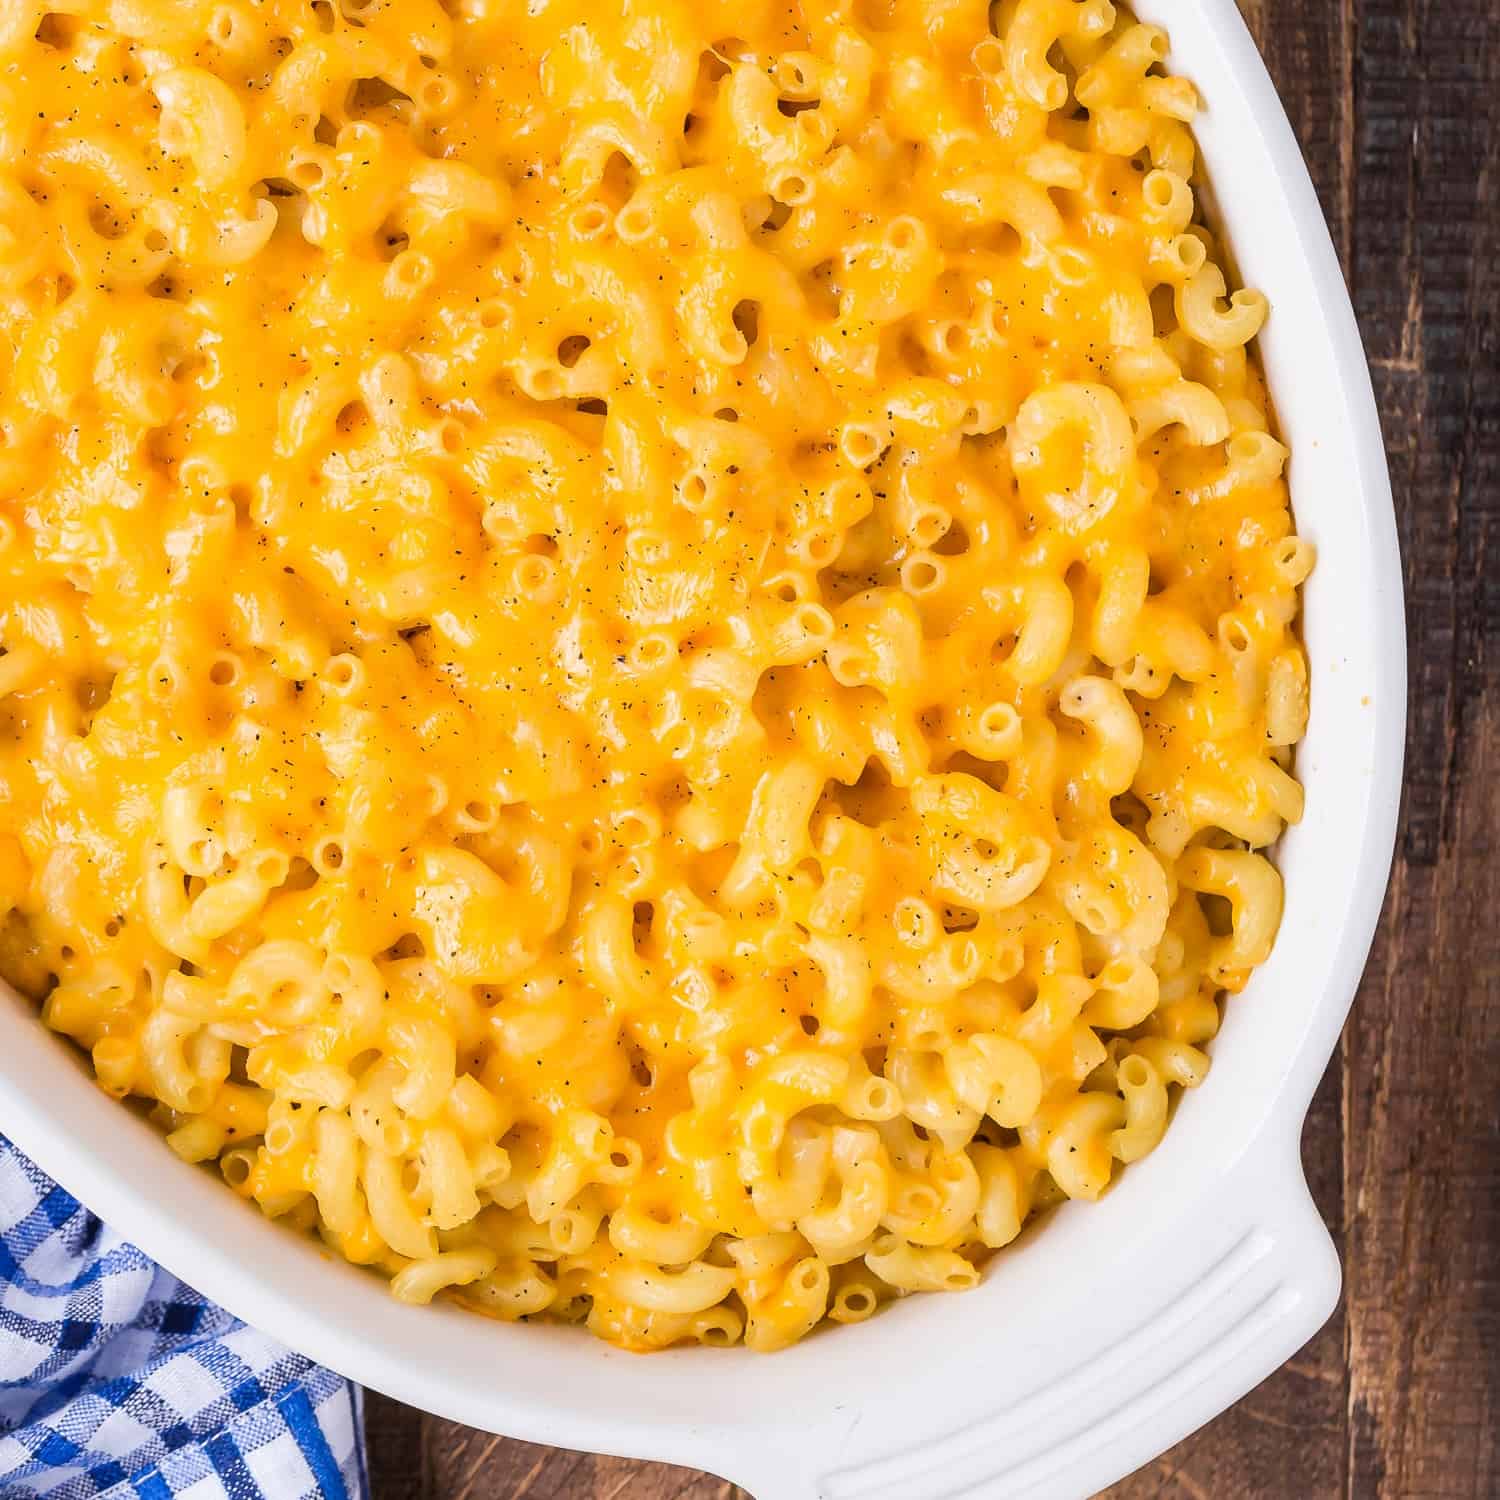 https://www.rachelcooks.com/wp-content/uploads/2023/02/baked-macaroni-and-cheese-1500-4-square.jpg